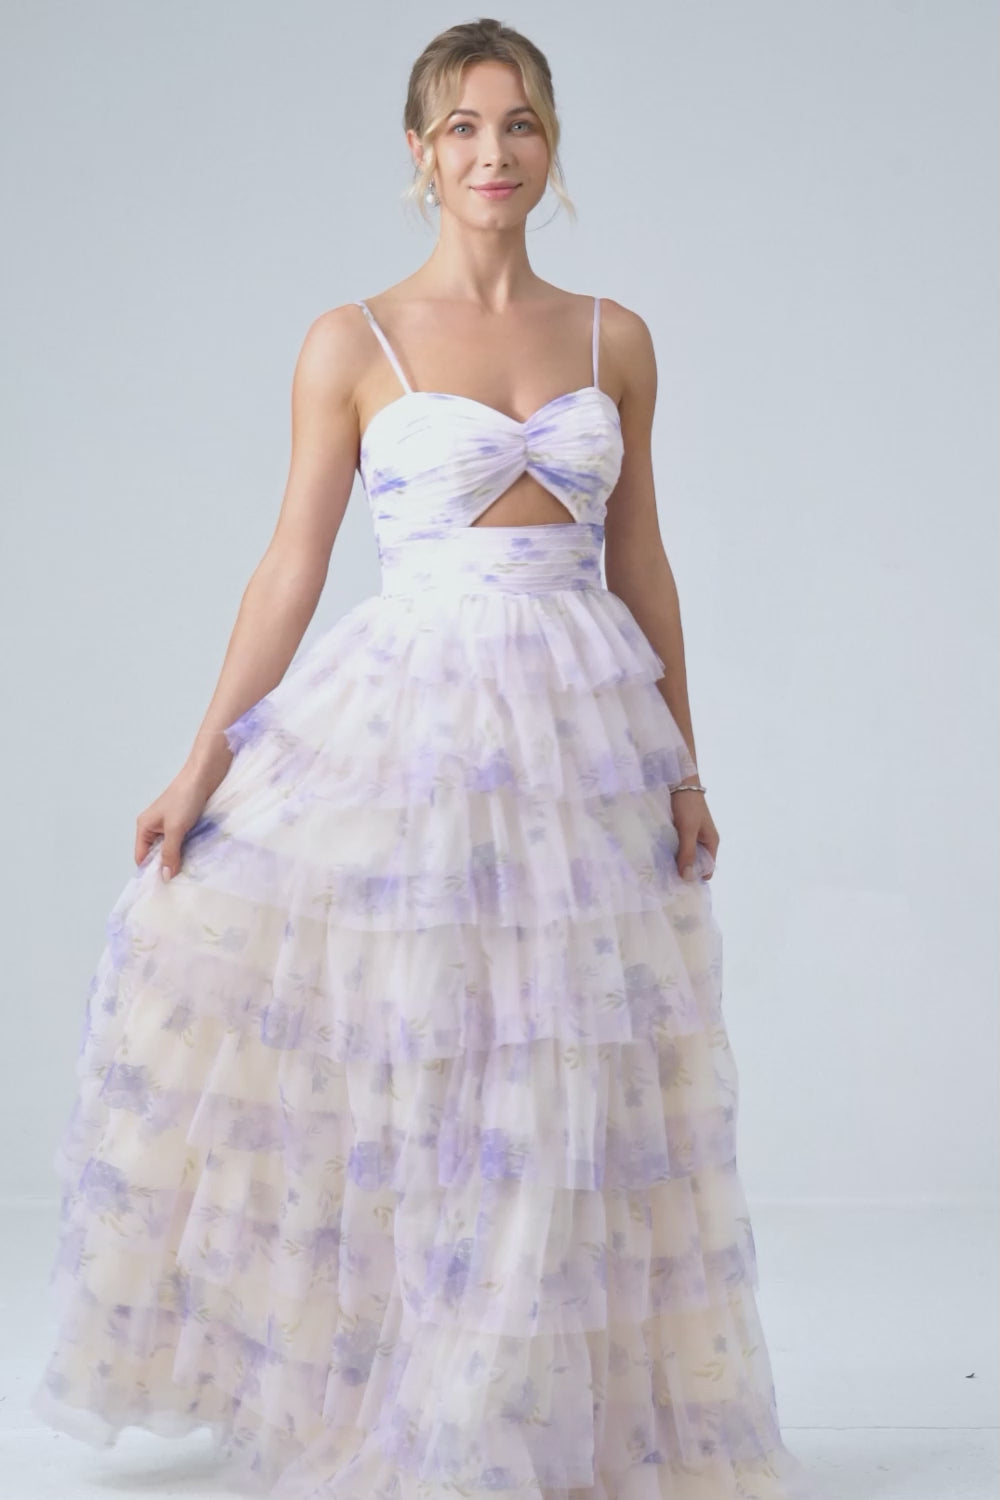 Lavender Flower Princess Spaghetti Straps Tiered Prom Dress with Pleated